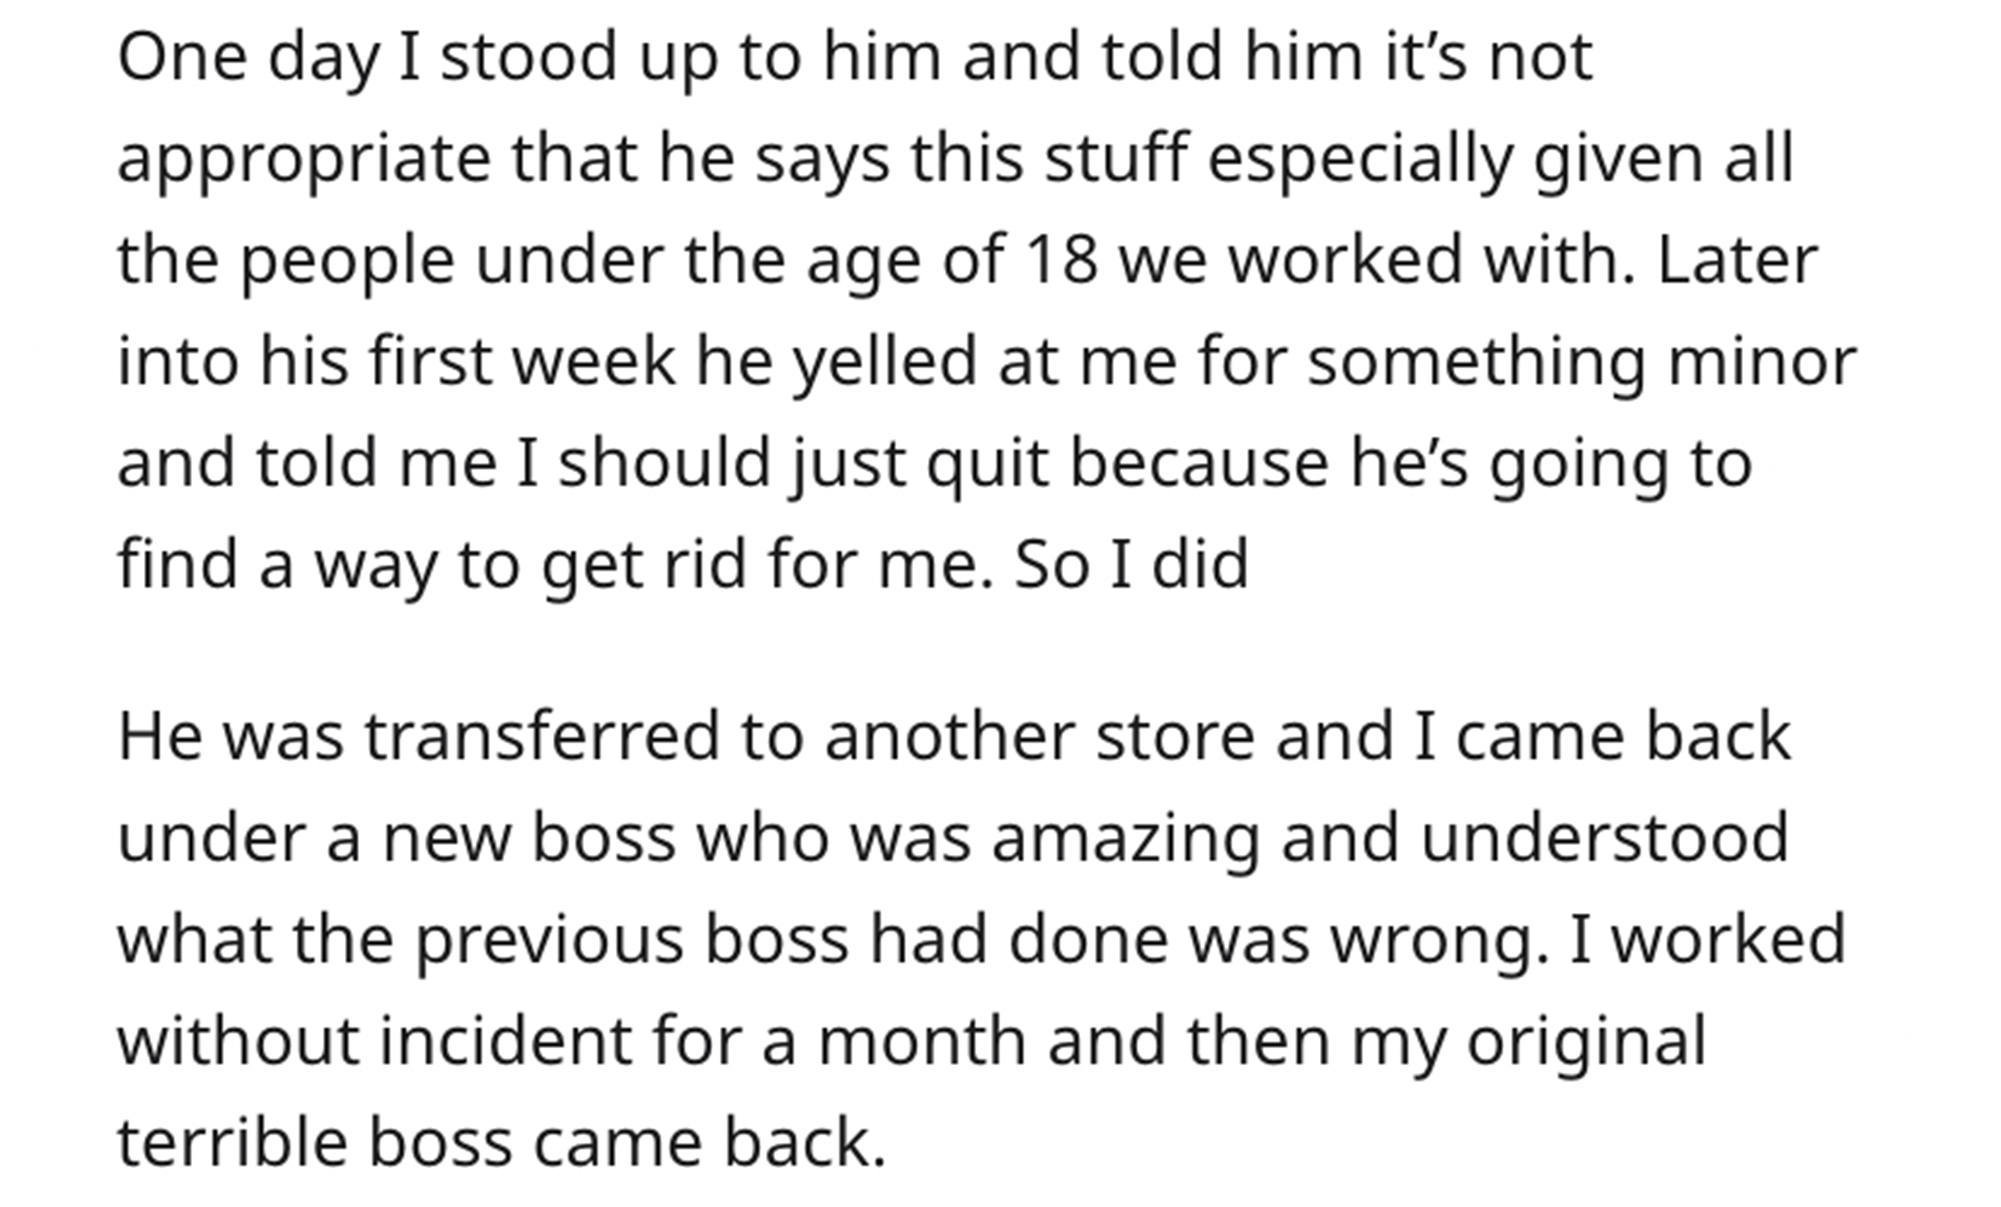 employee sues boss story - handwriting - One day I stood up to him and told him it's not appropriate that he says this stuff especially given all the people under the age of 18 we worked with. Later into his first week he yelled at me for something minor 